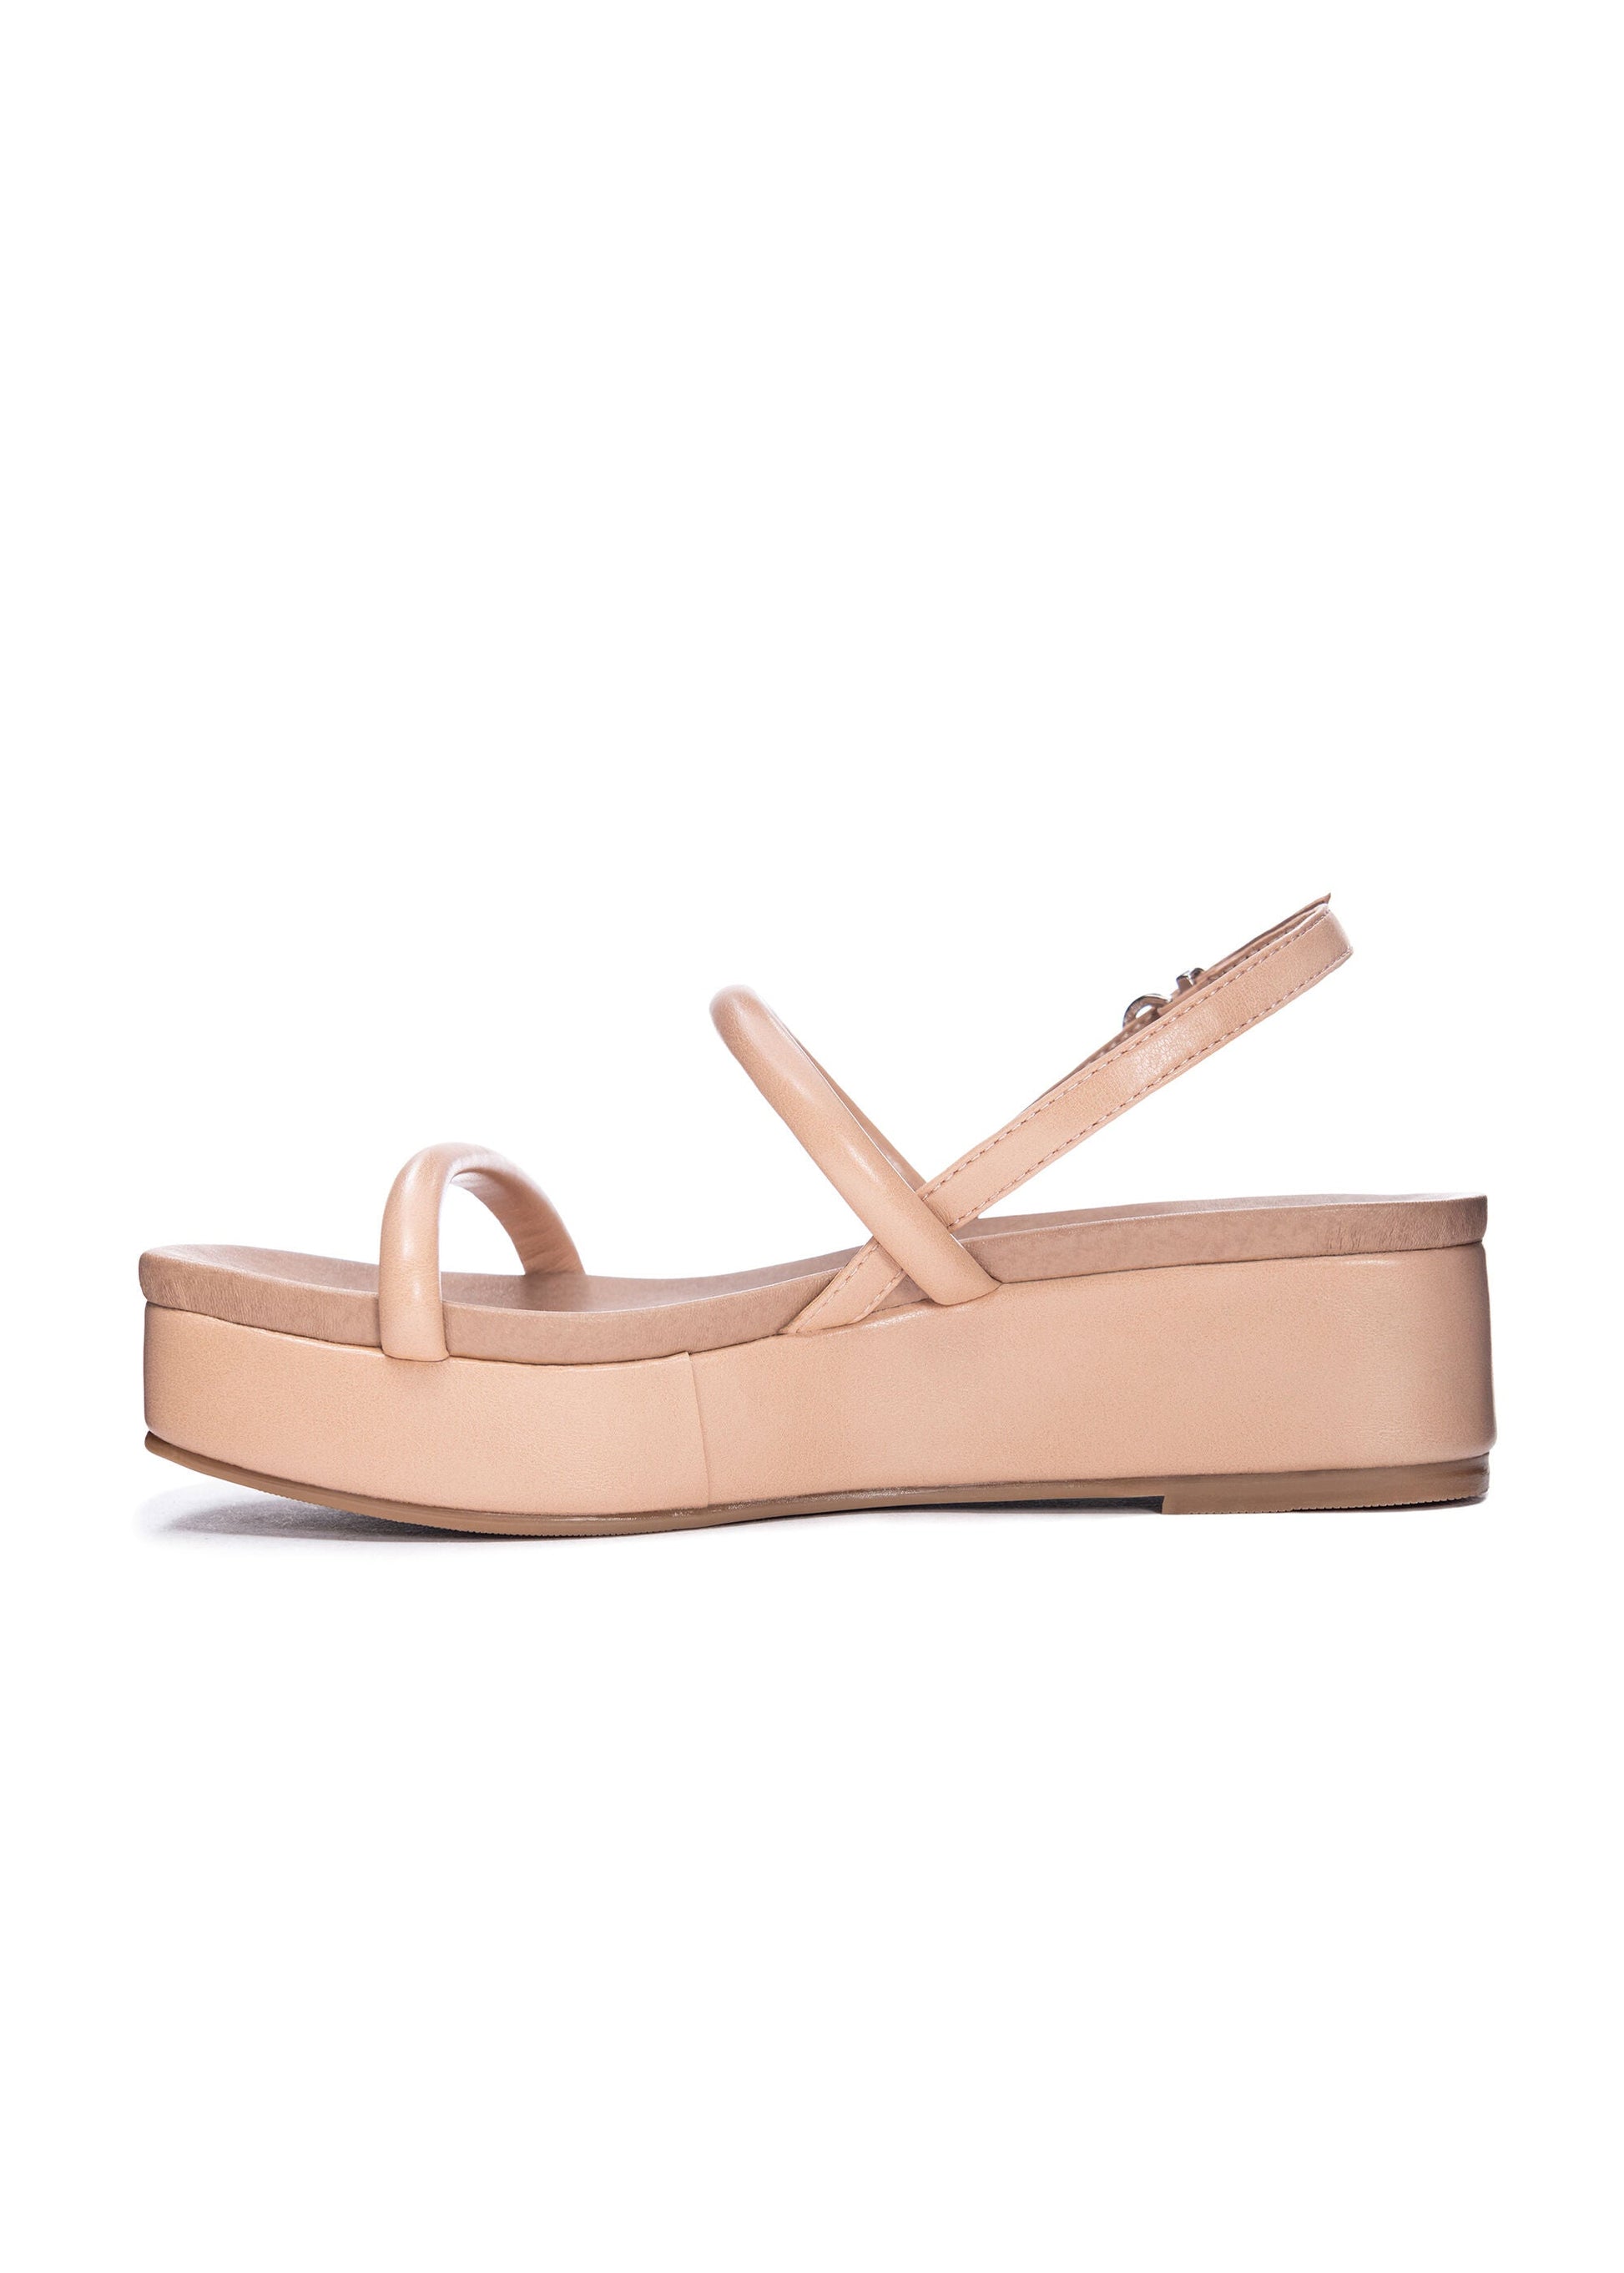 CL by Chinese Laundry Skippy Strappy Platform Sandals - FINAL SALE Accessories